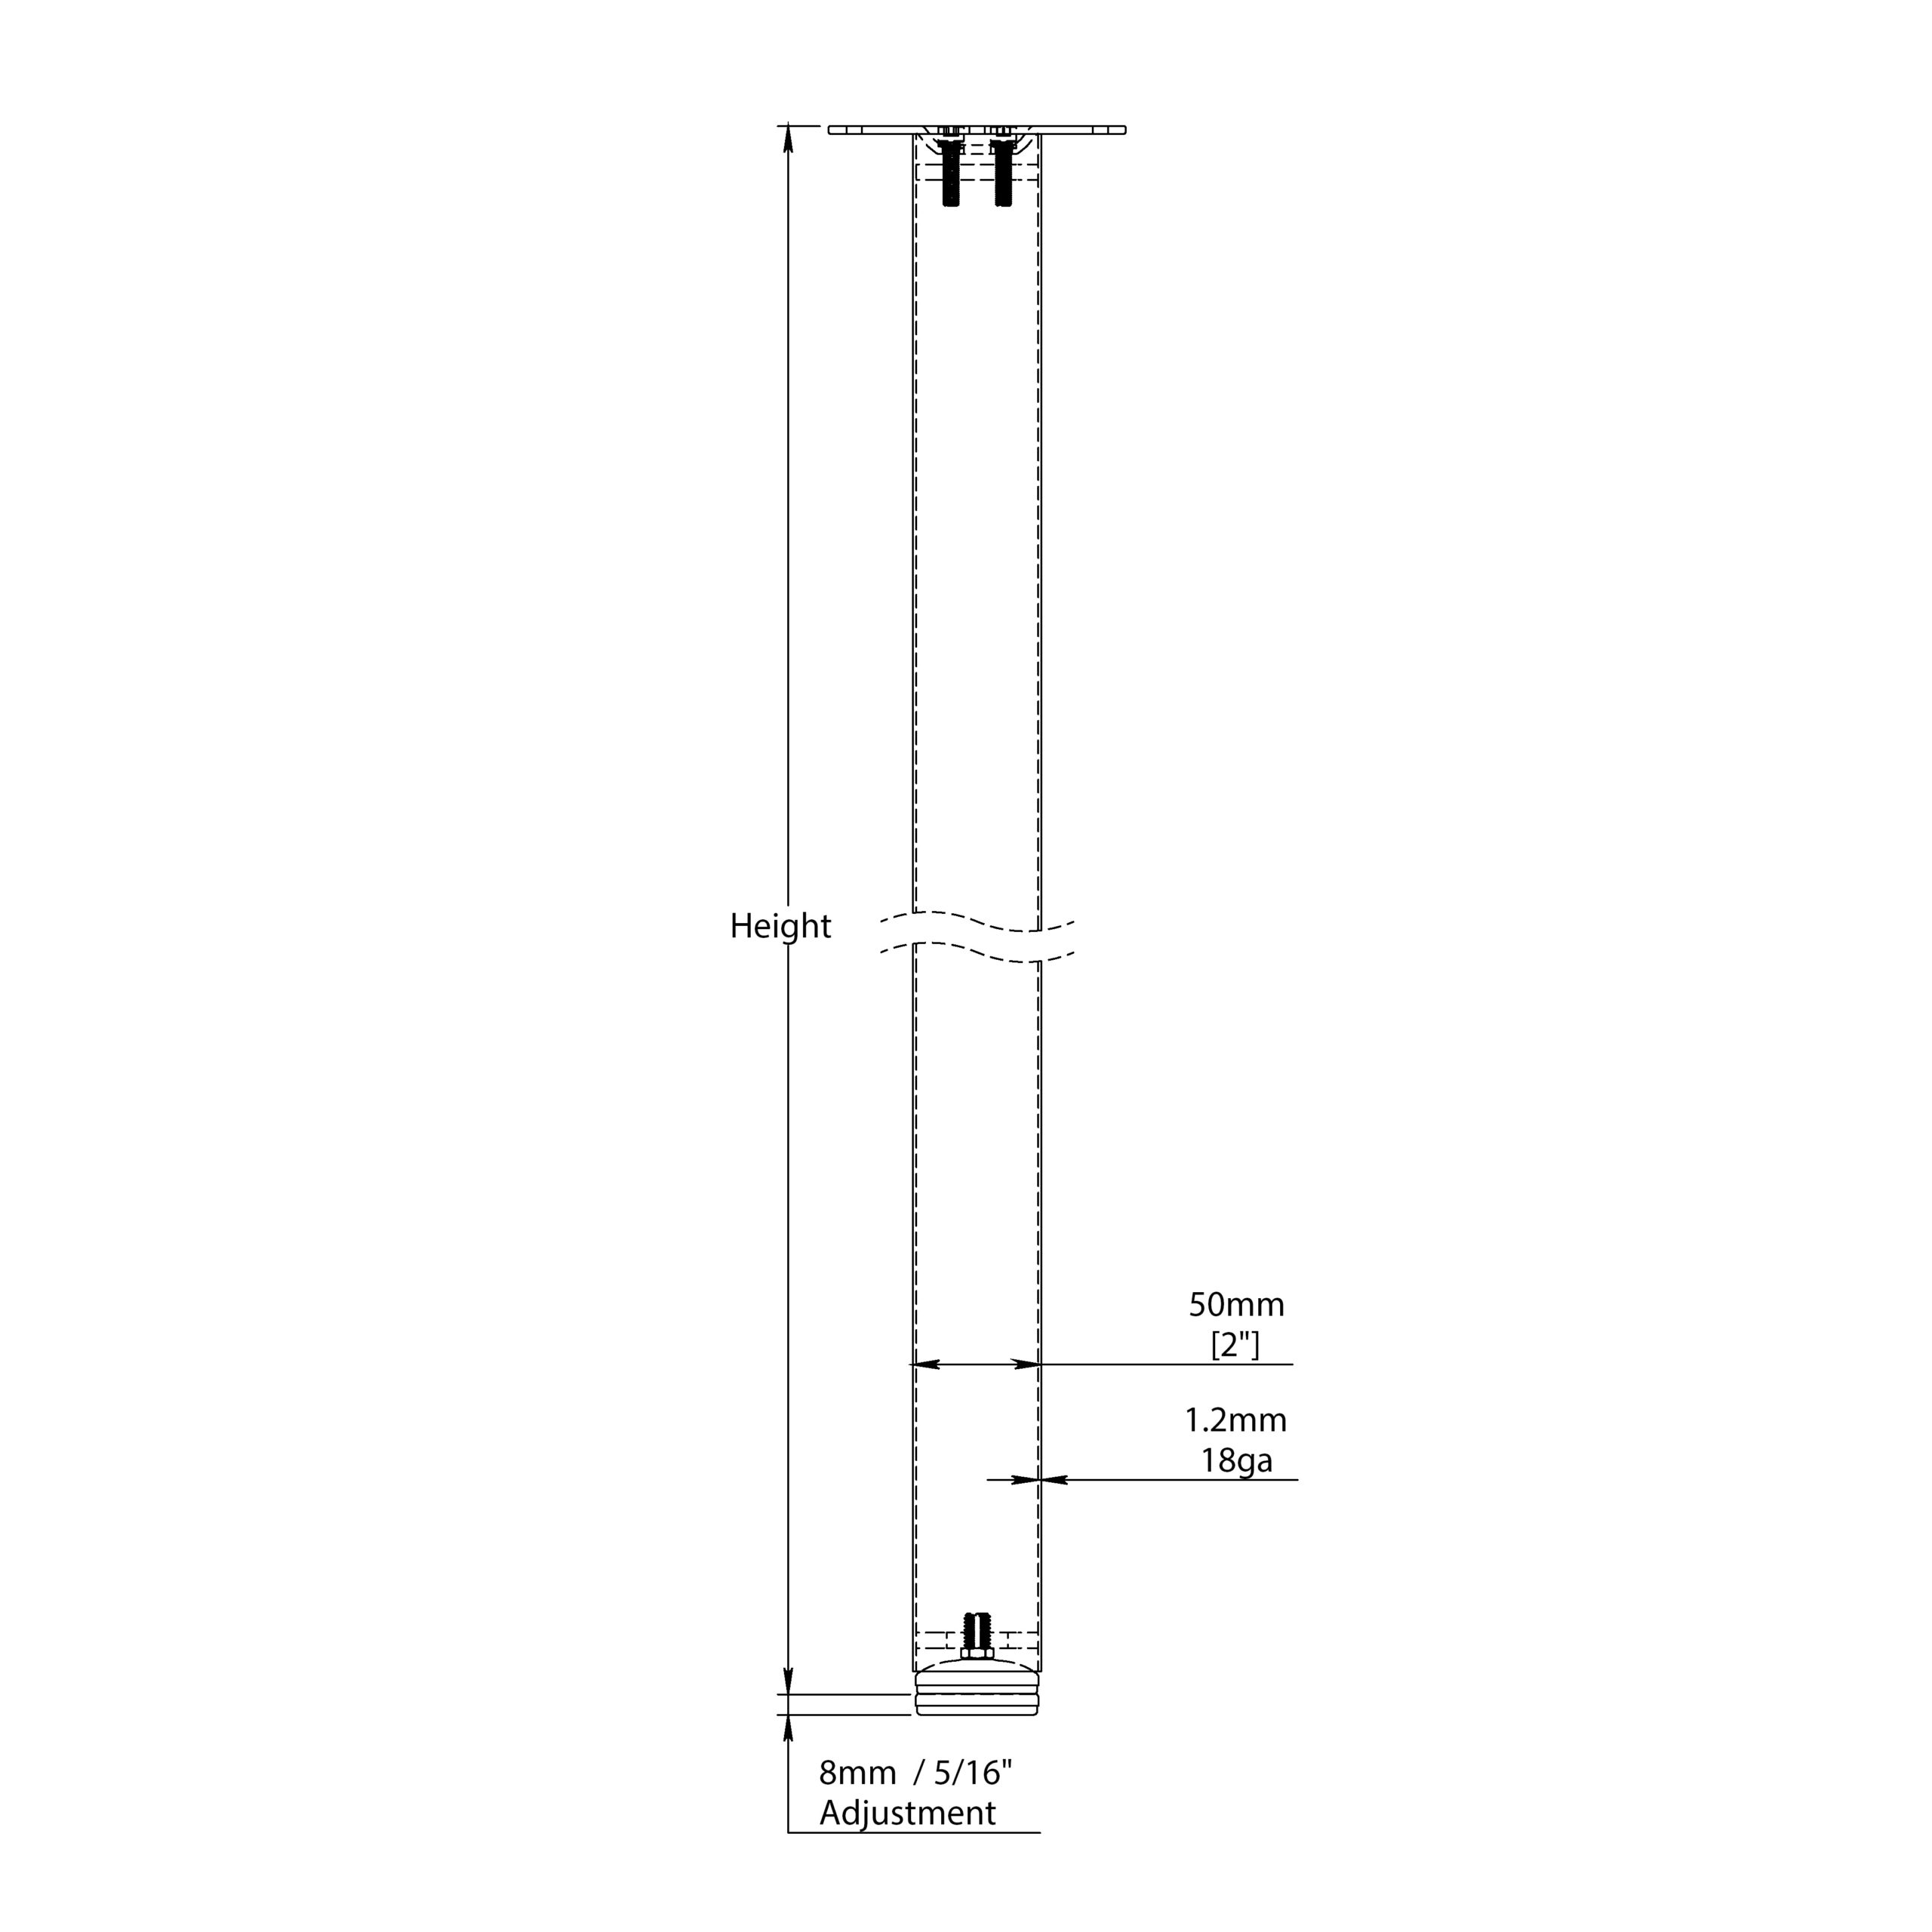 A diagram showing the height of a tall pole.